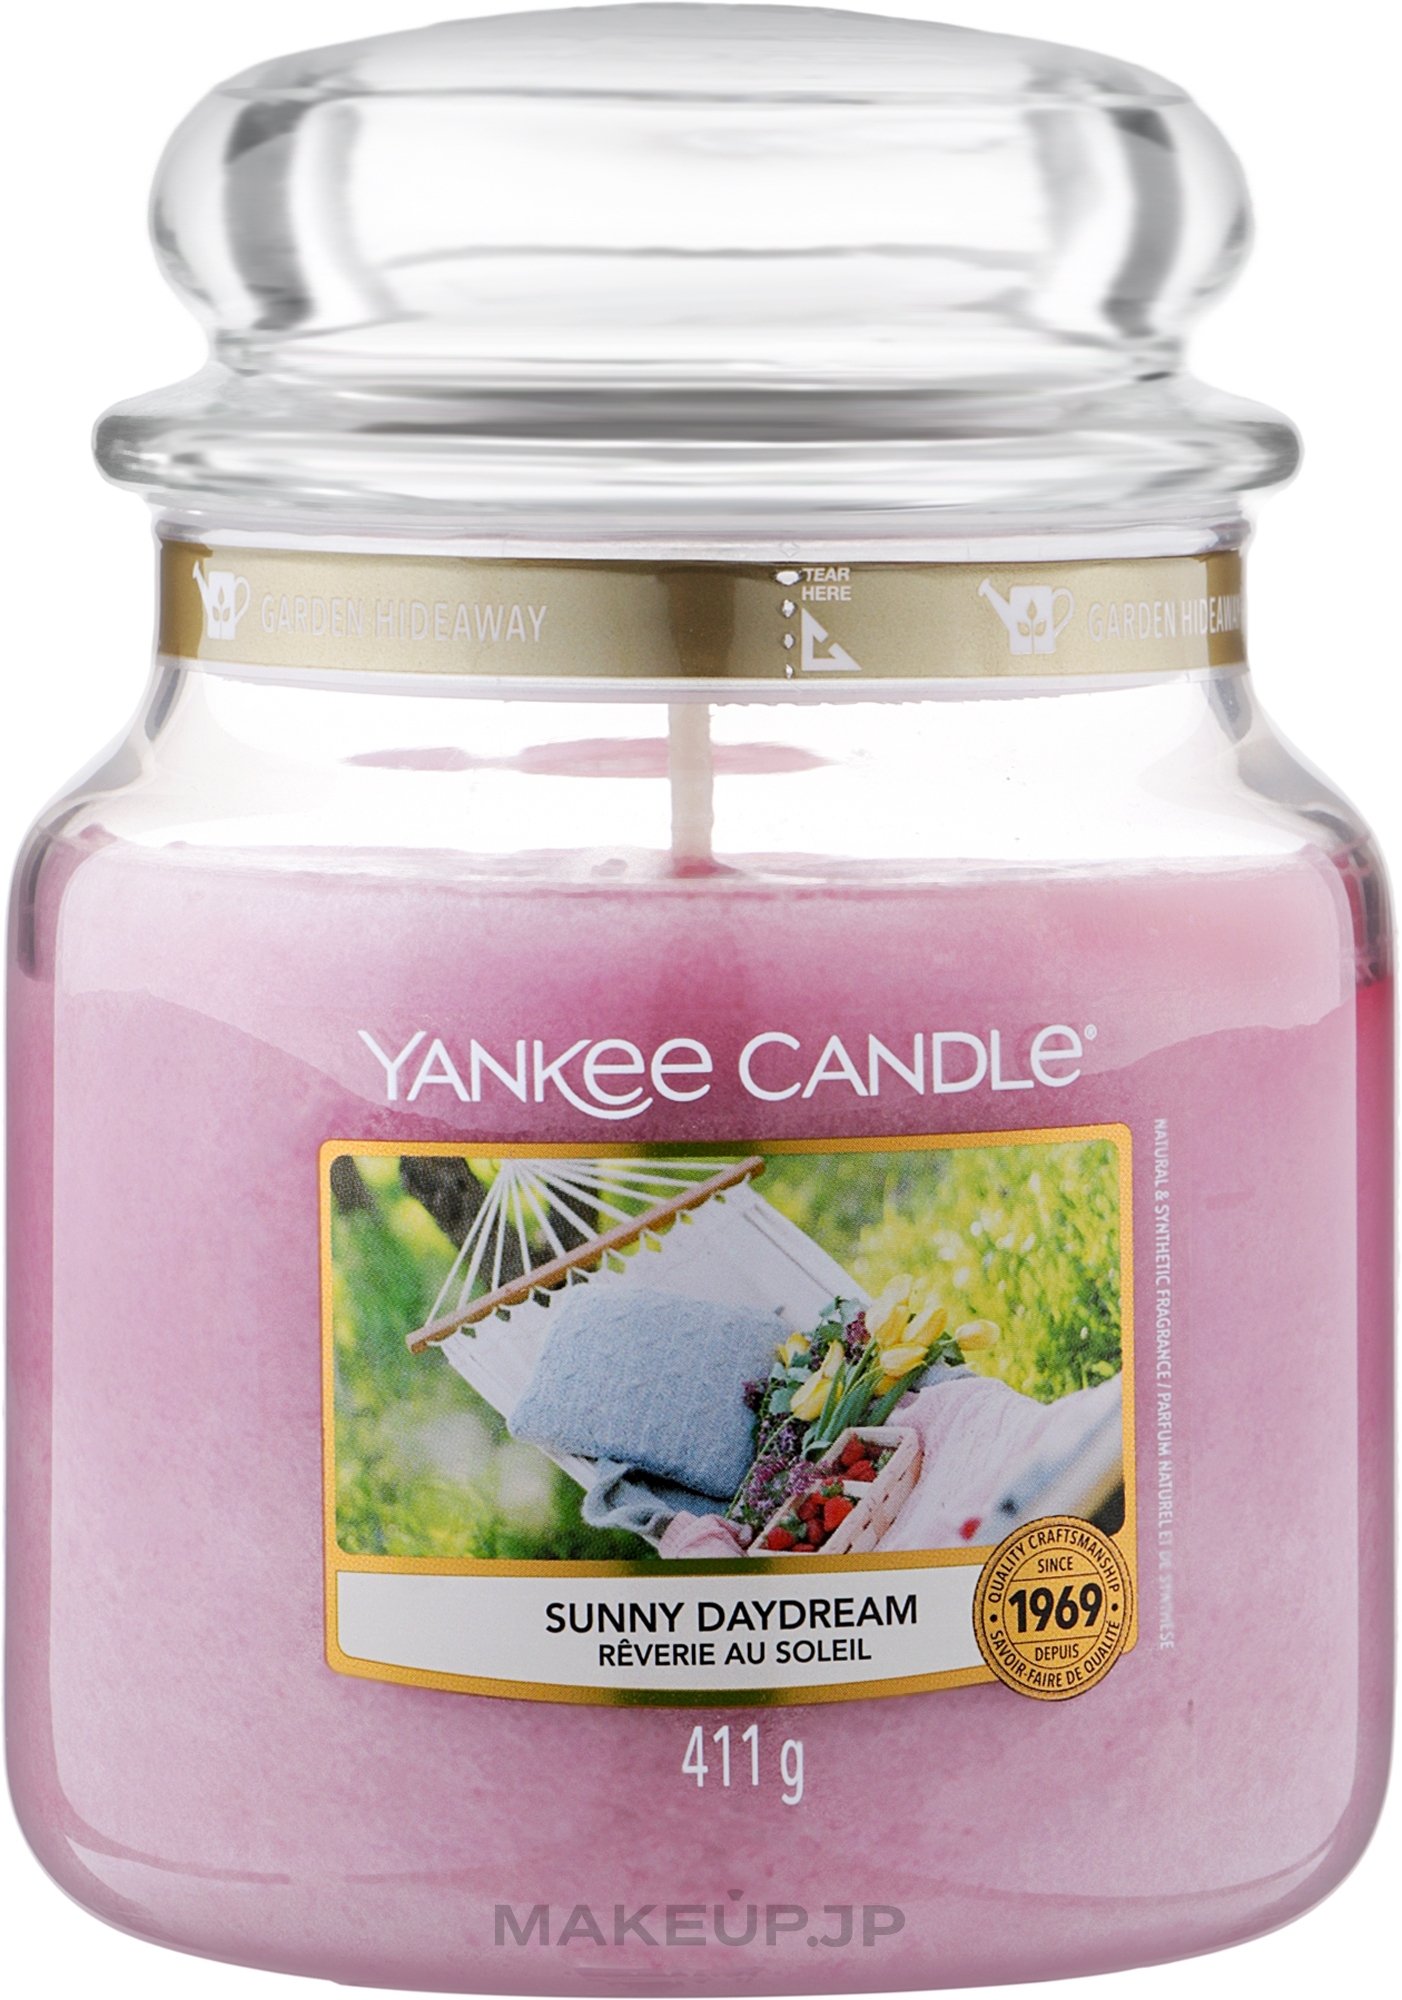 Scented Candle - Yankee Candle Sunny Daydream — photo 411 g